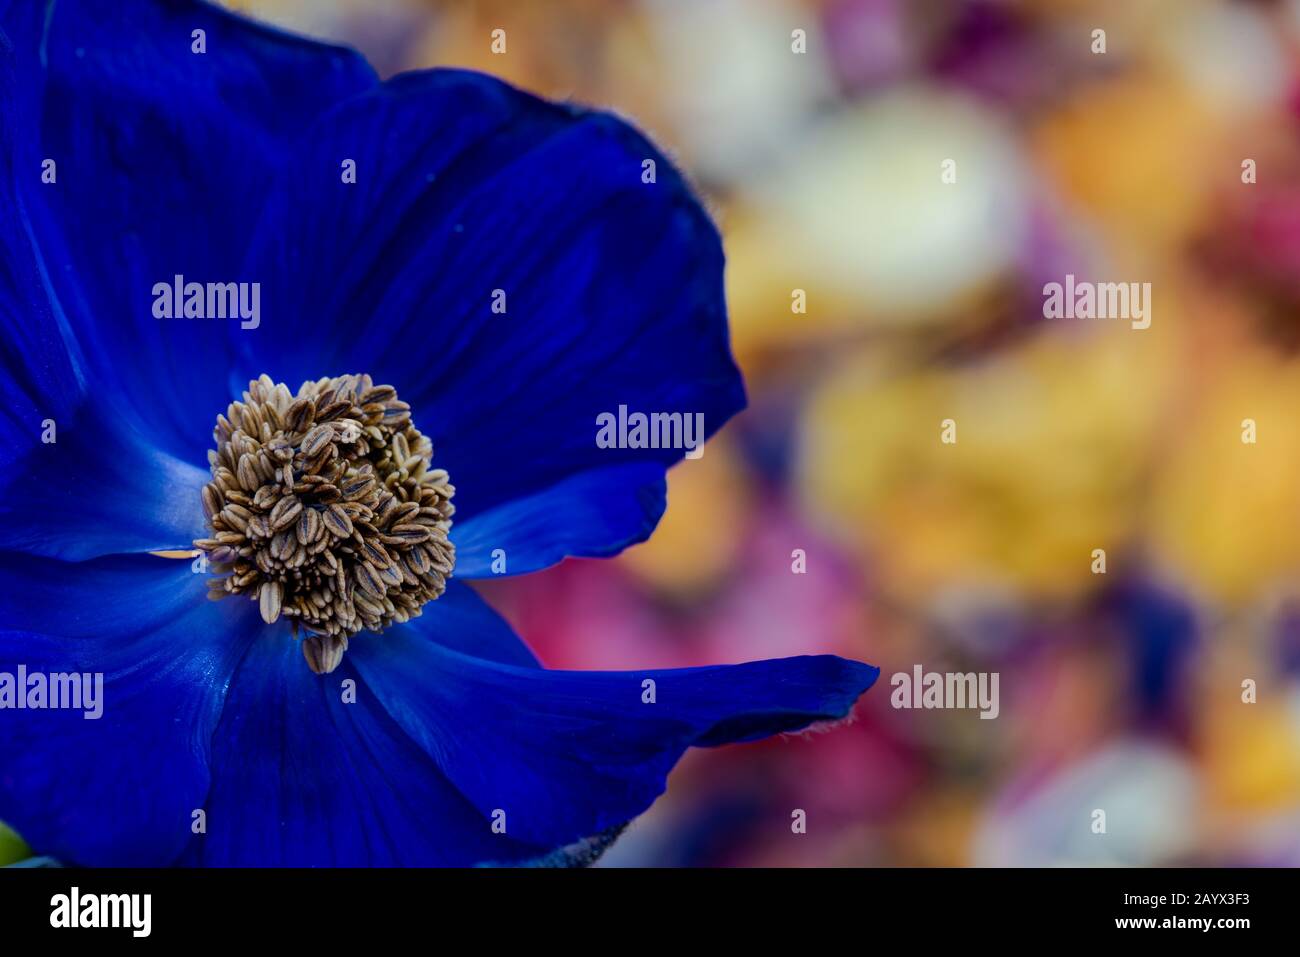 Isolated single deep blue anemone blossom macro on colorful blurred petals background Stock Photo